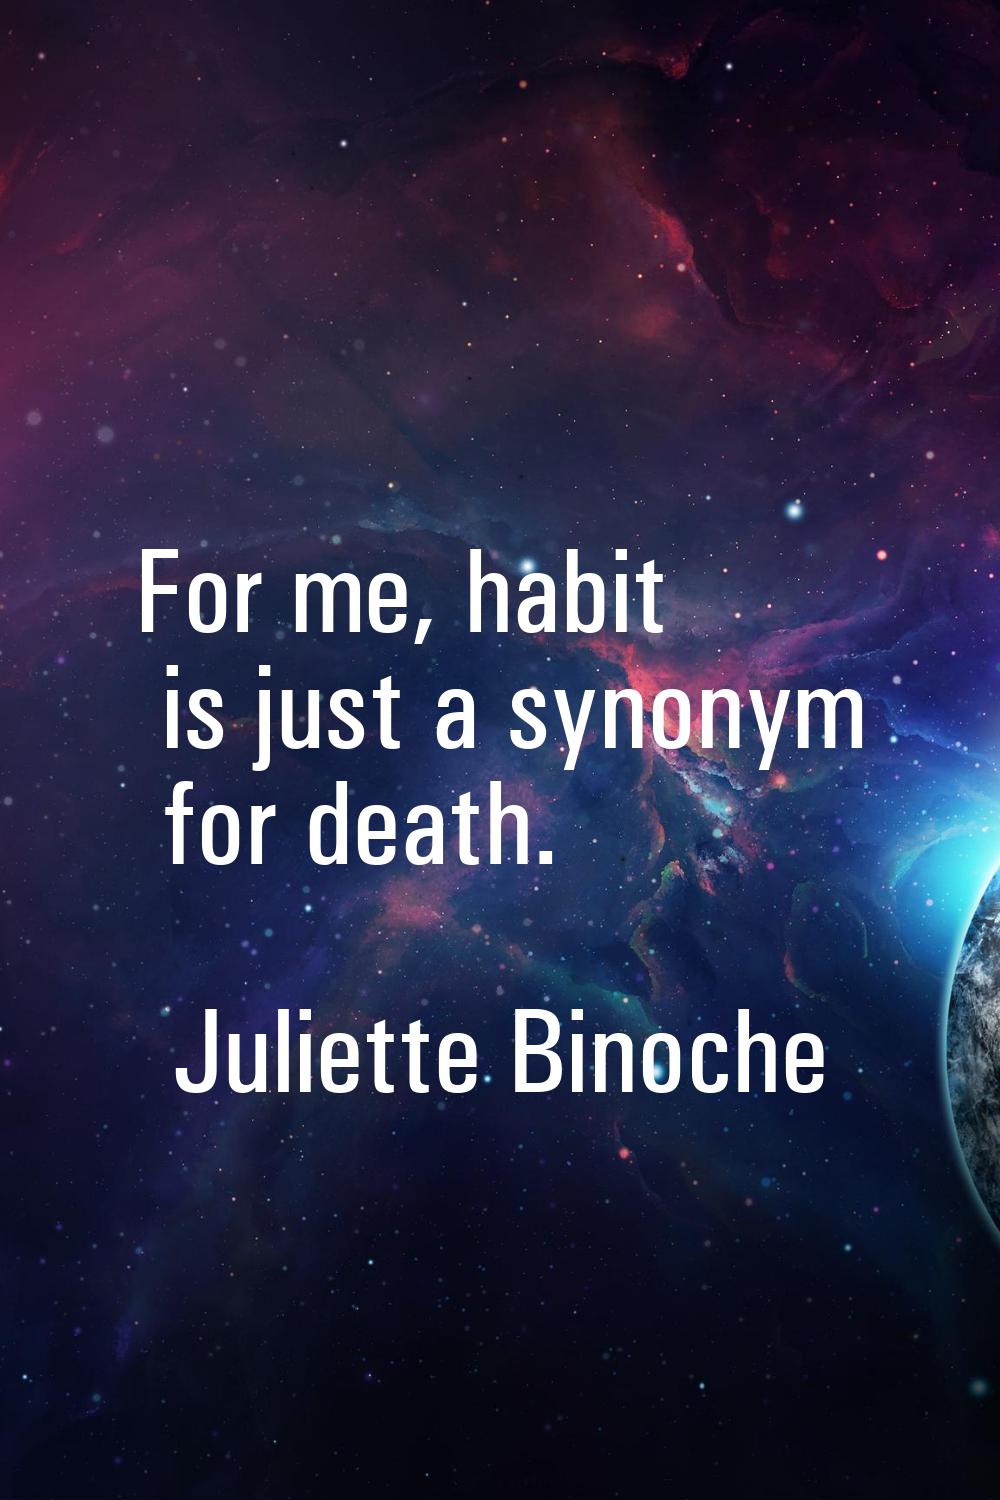 For me, habit is just a synonym for death.